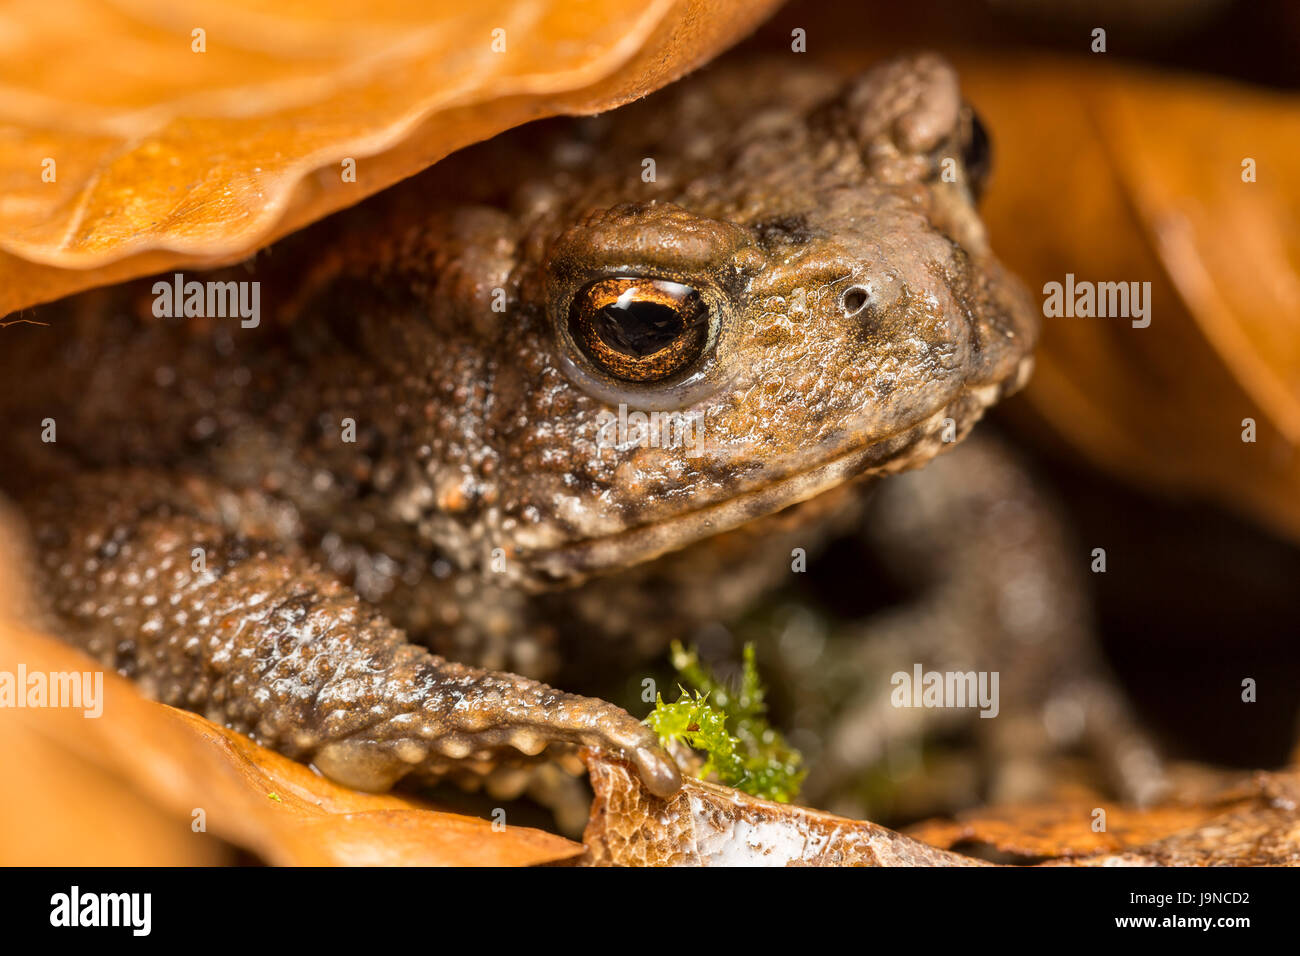 Crapaud commun, Bufo bufo, Catbrook, Monmouthshire, Wales Banque D'Images